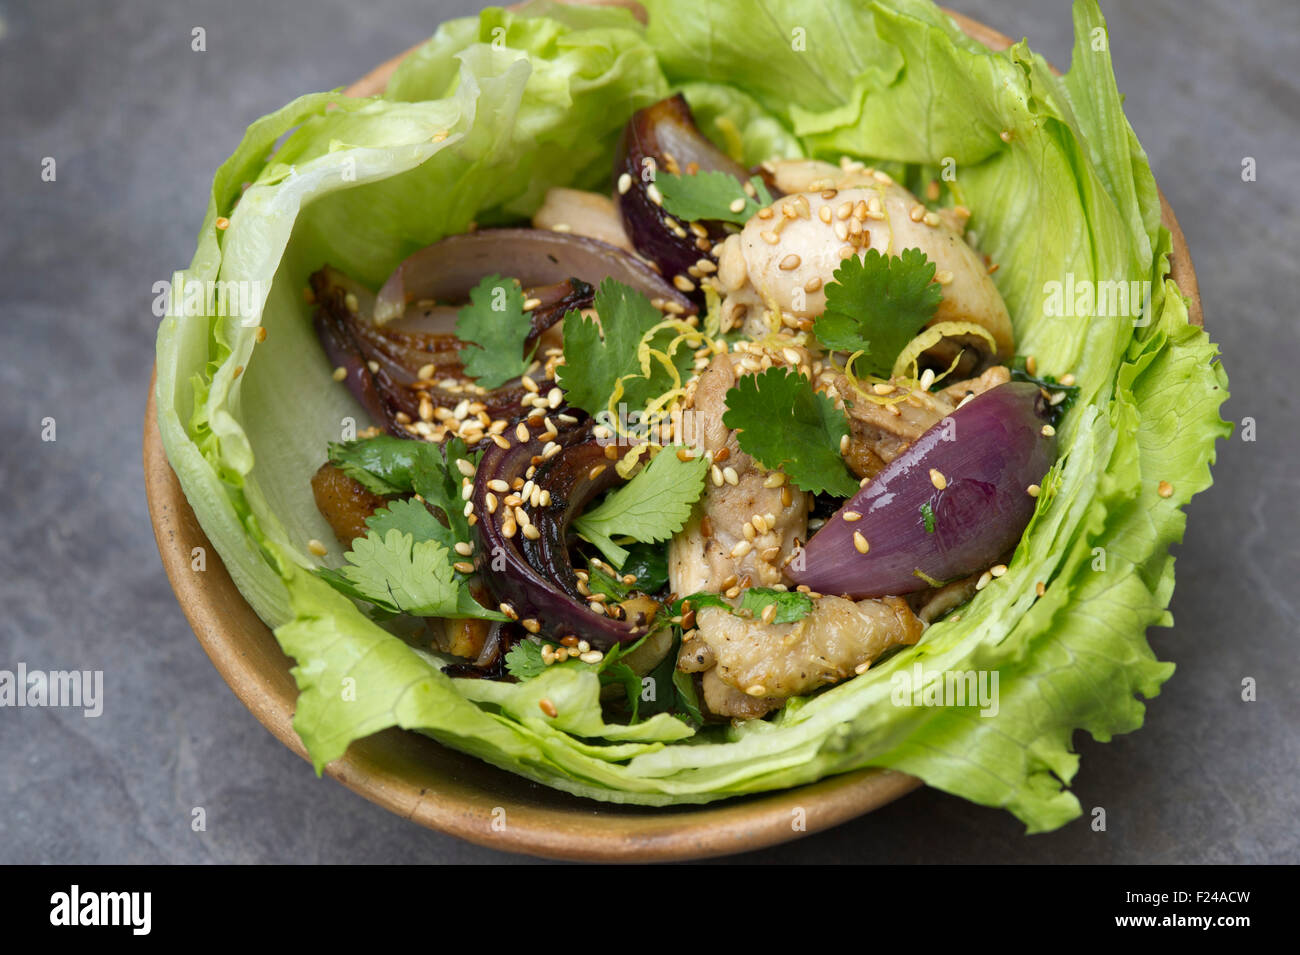 Paleo diet food, chicken with lemon, sesame and oregamo, supposedly based on 'cave man' Palaeolithic foods for health. a UK Stock Photo